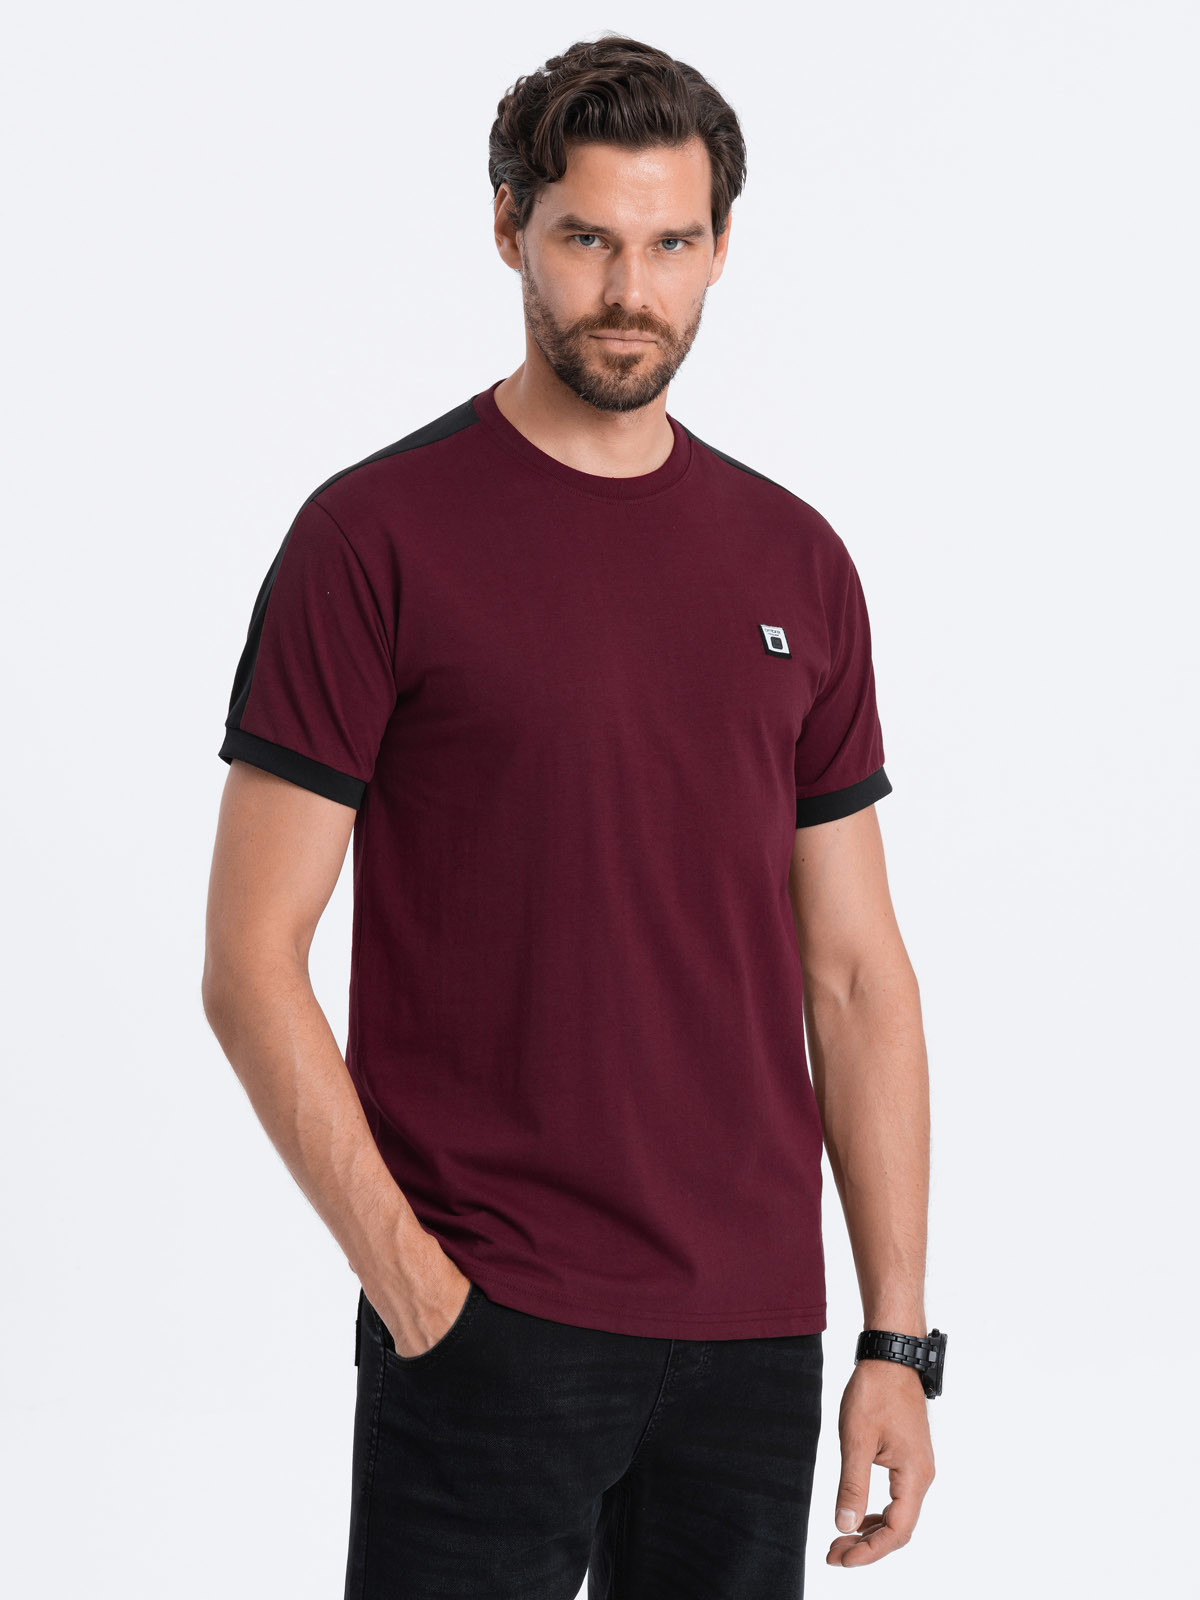 Men's cotton t-shirt with contrasting inserts V2 S1632